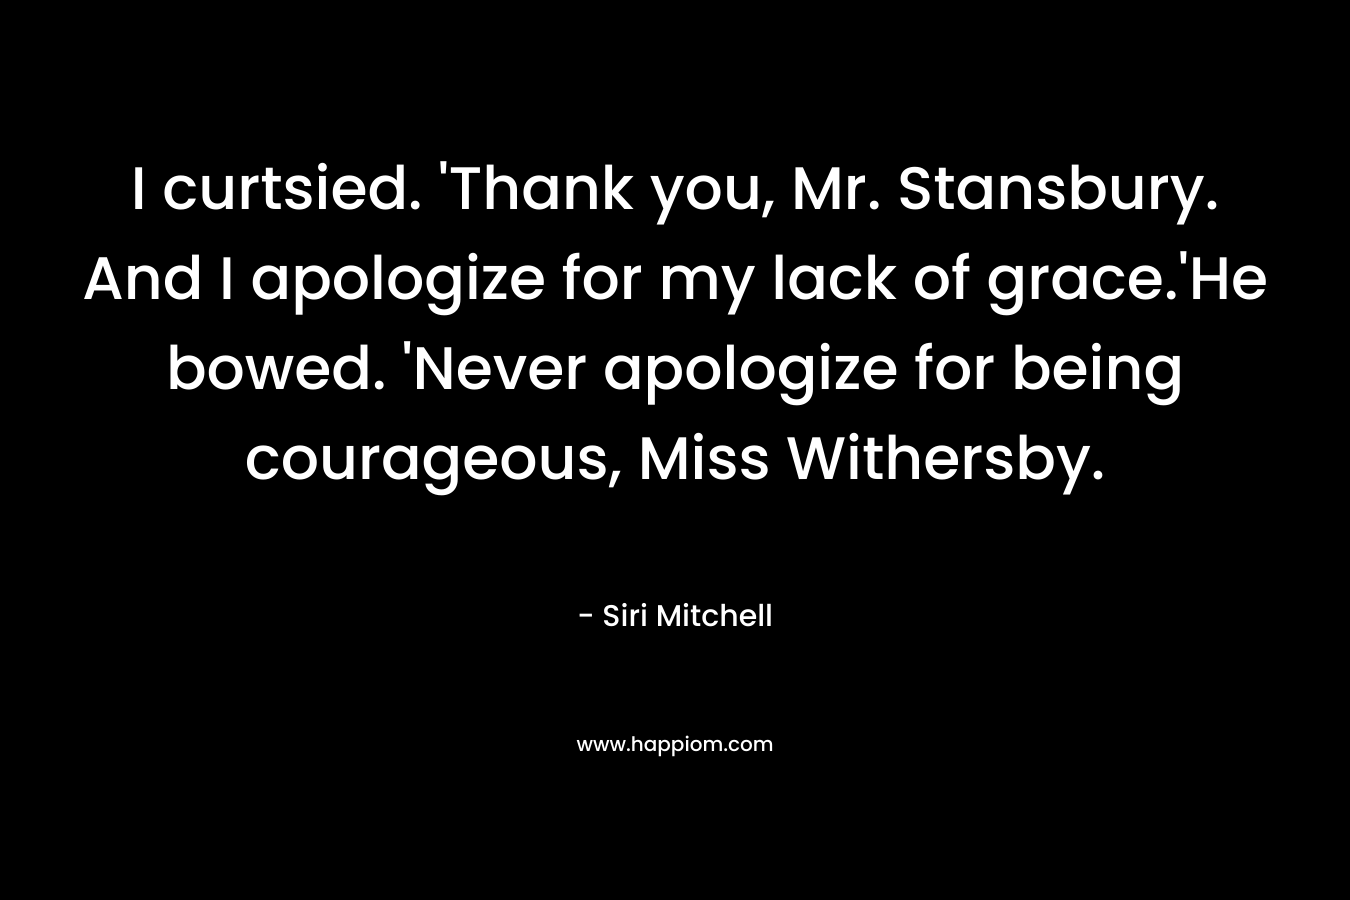 I curtsied. ‘Thank you, Mr. Stansbury. And I apologize for my lack of grace.’He bowed. ‘Never apologize for being courageous, Miss Withersby. – Siri Mitchell